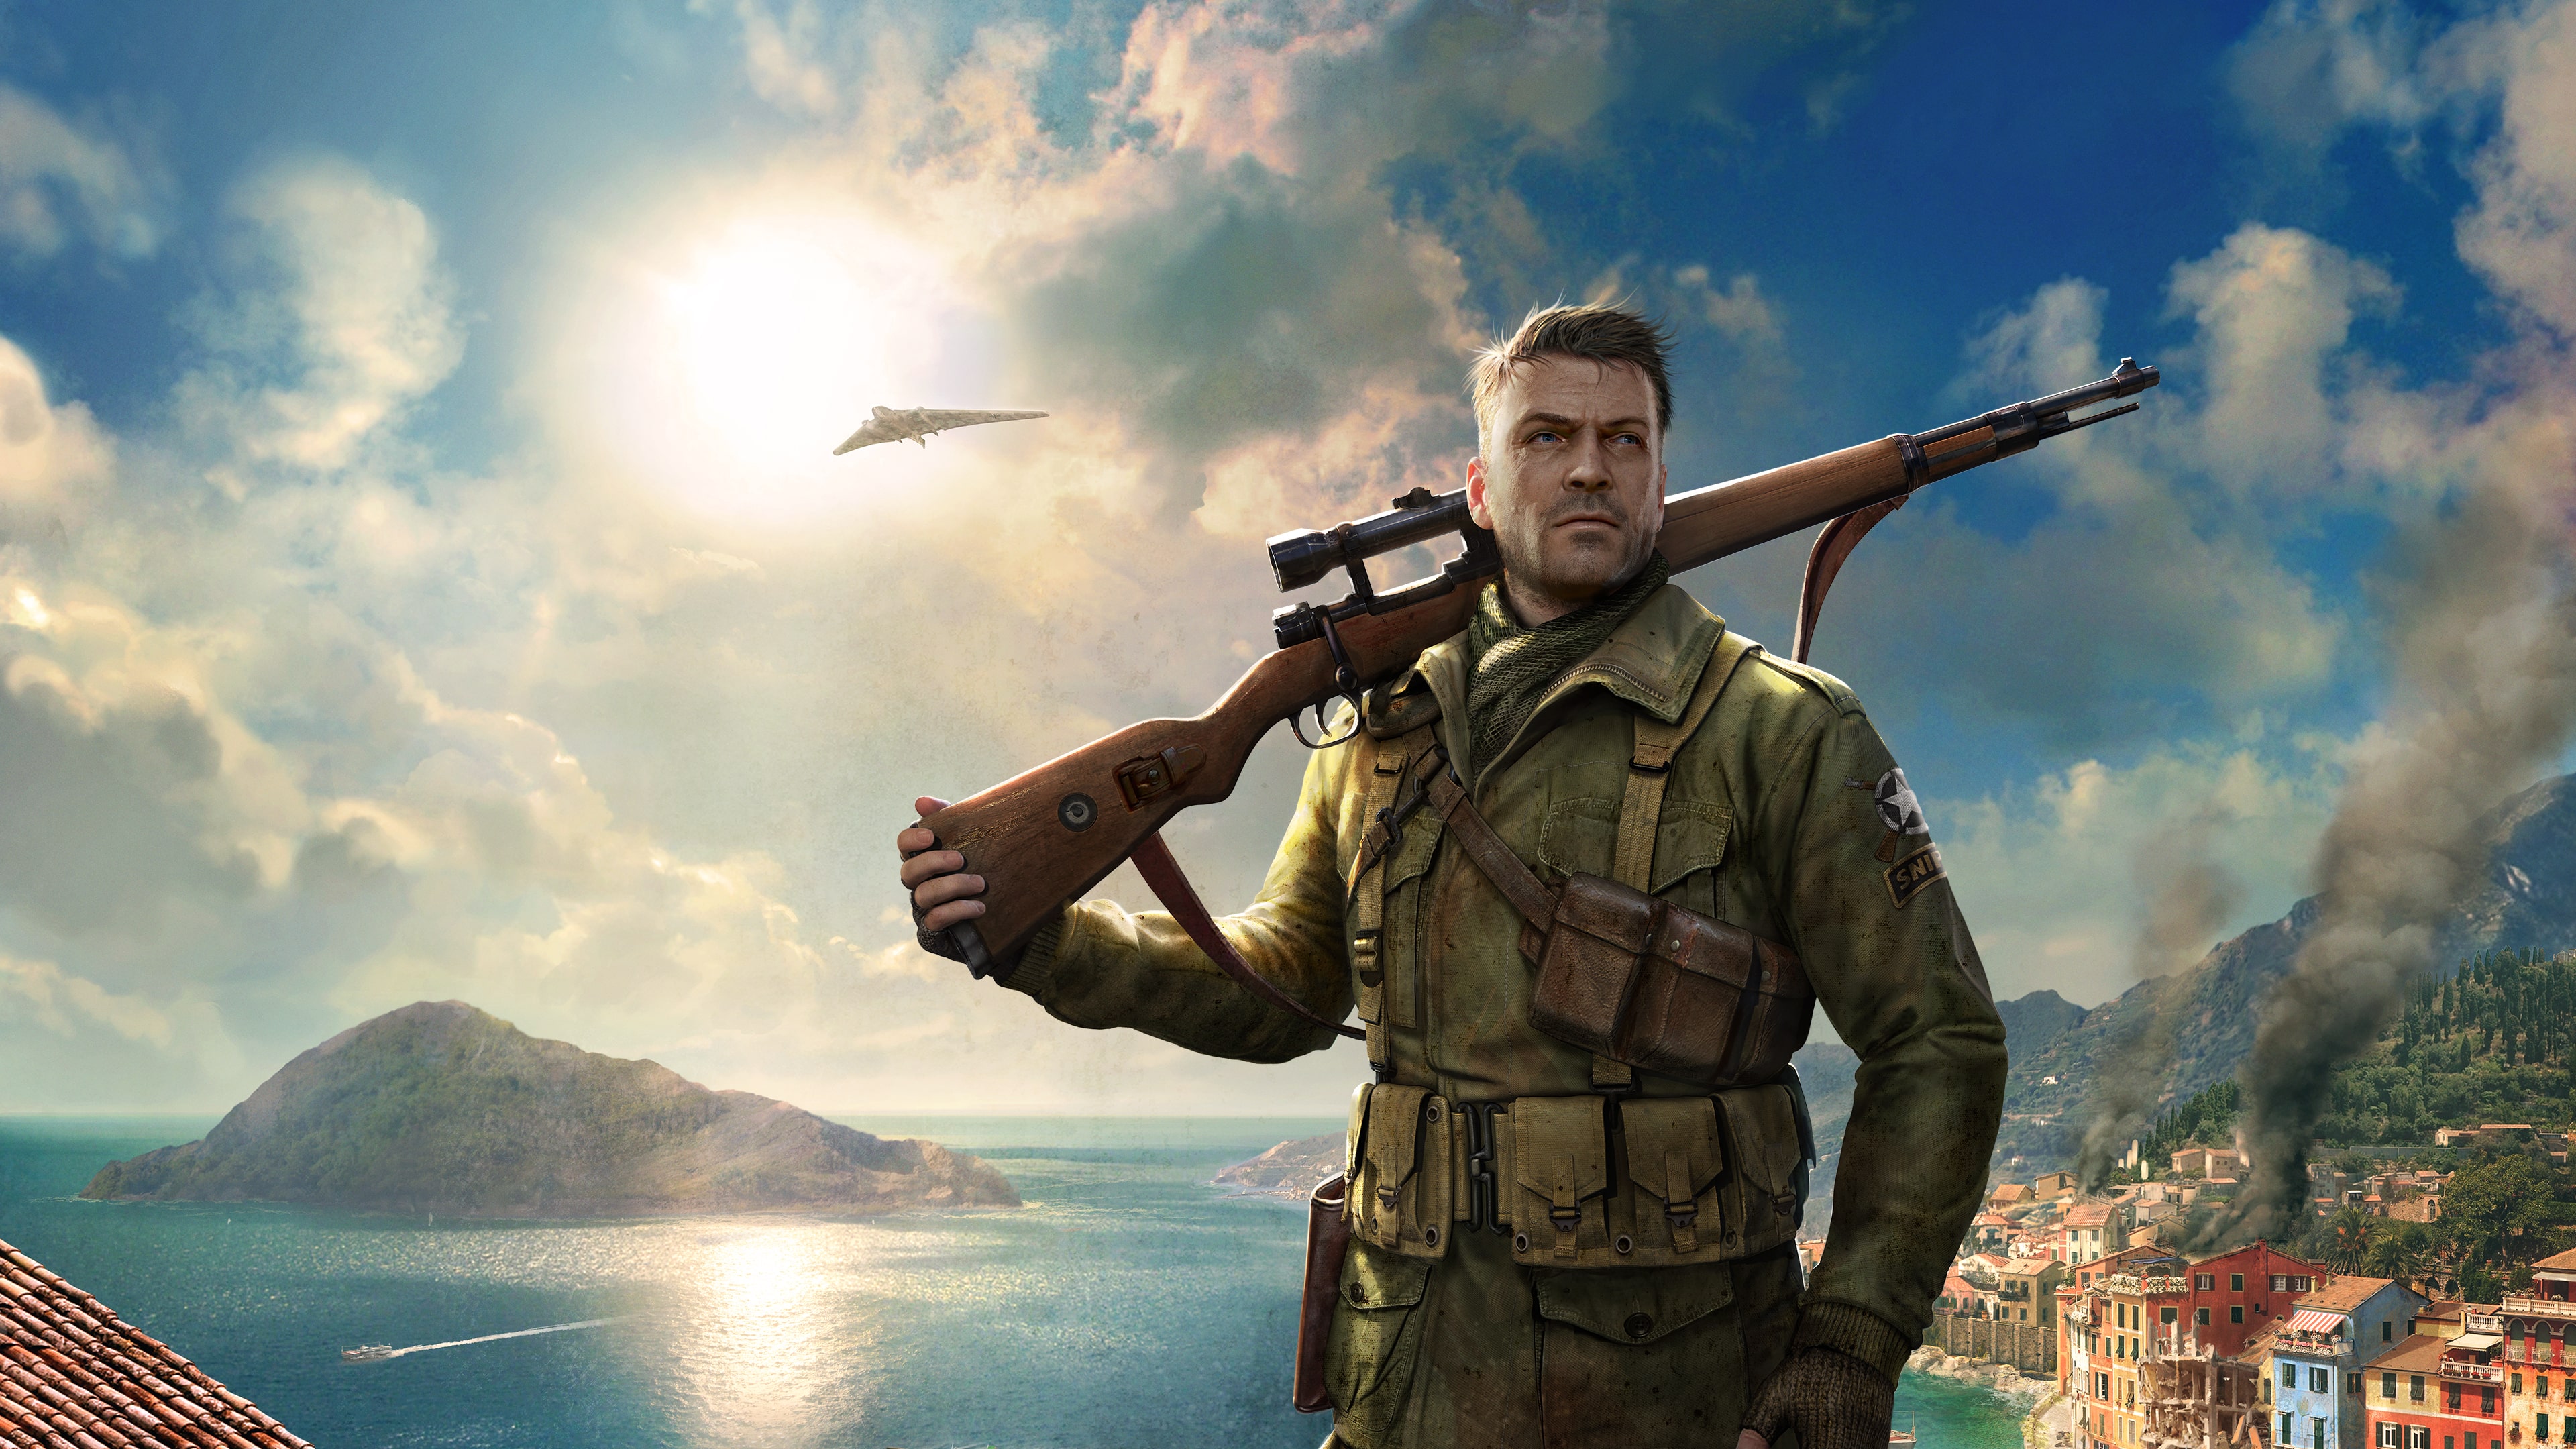 Sniper Elite 4 (Simplified Chinese, English, Japanese, Traditional Chinese)